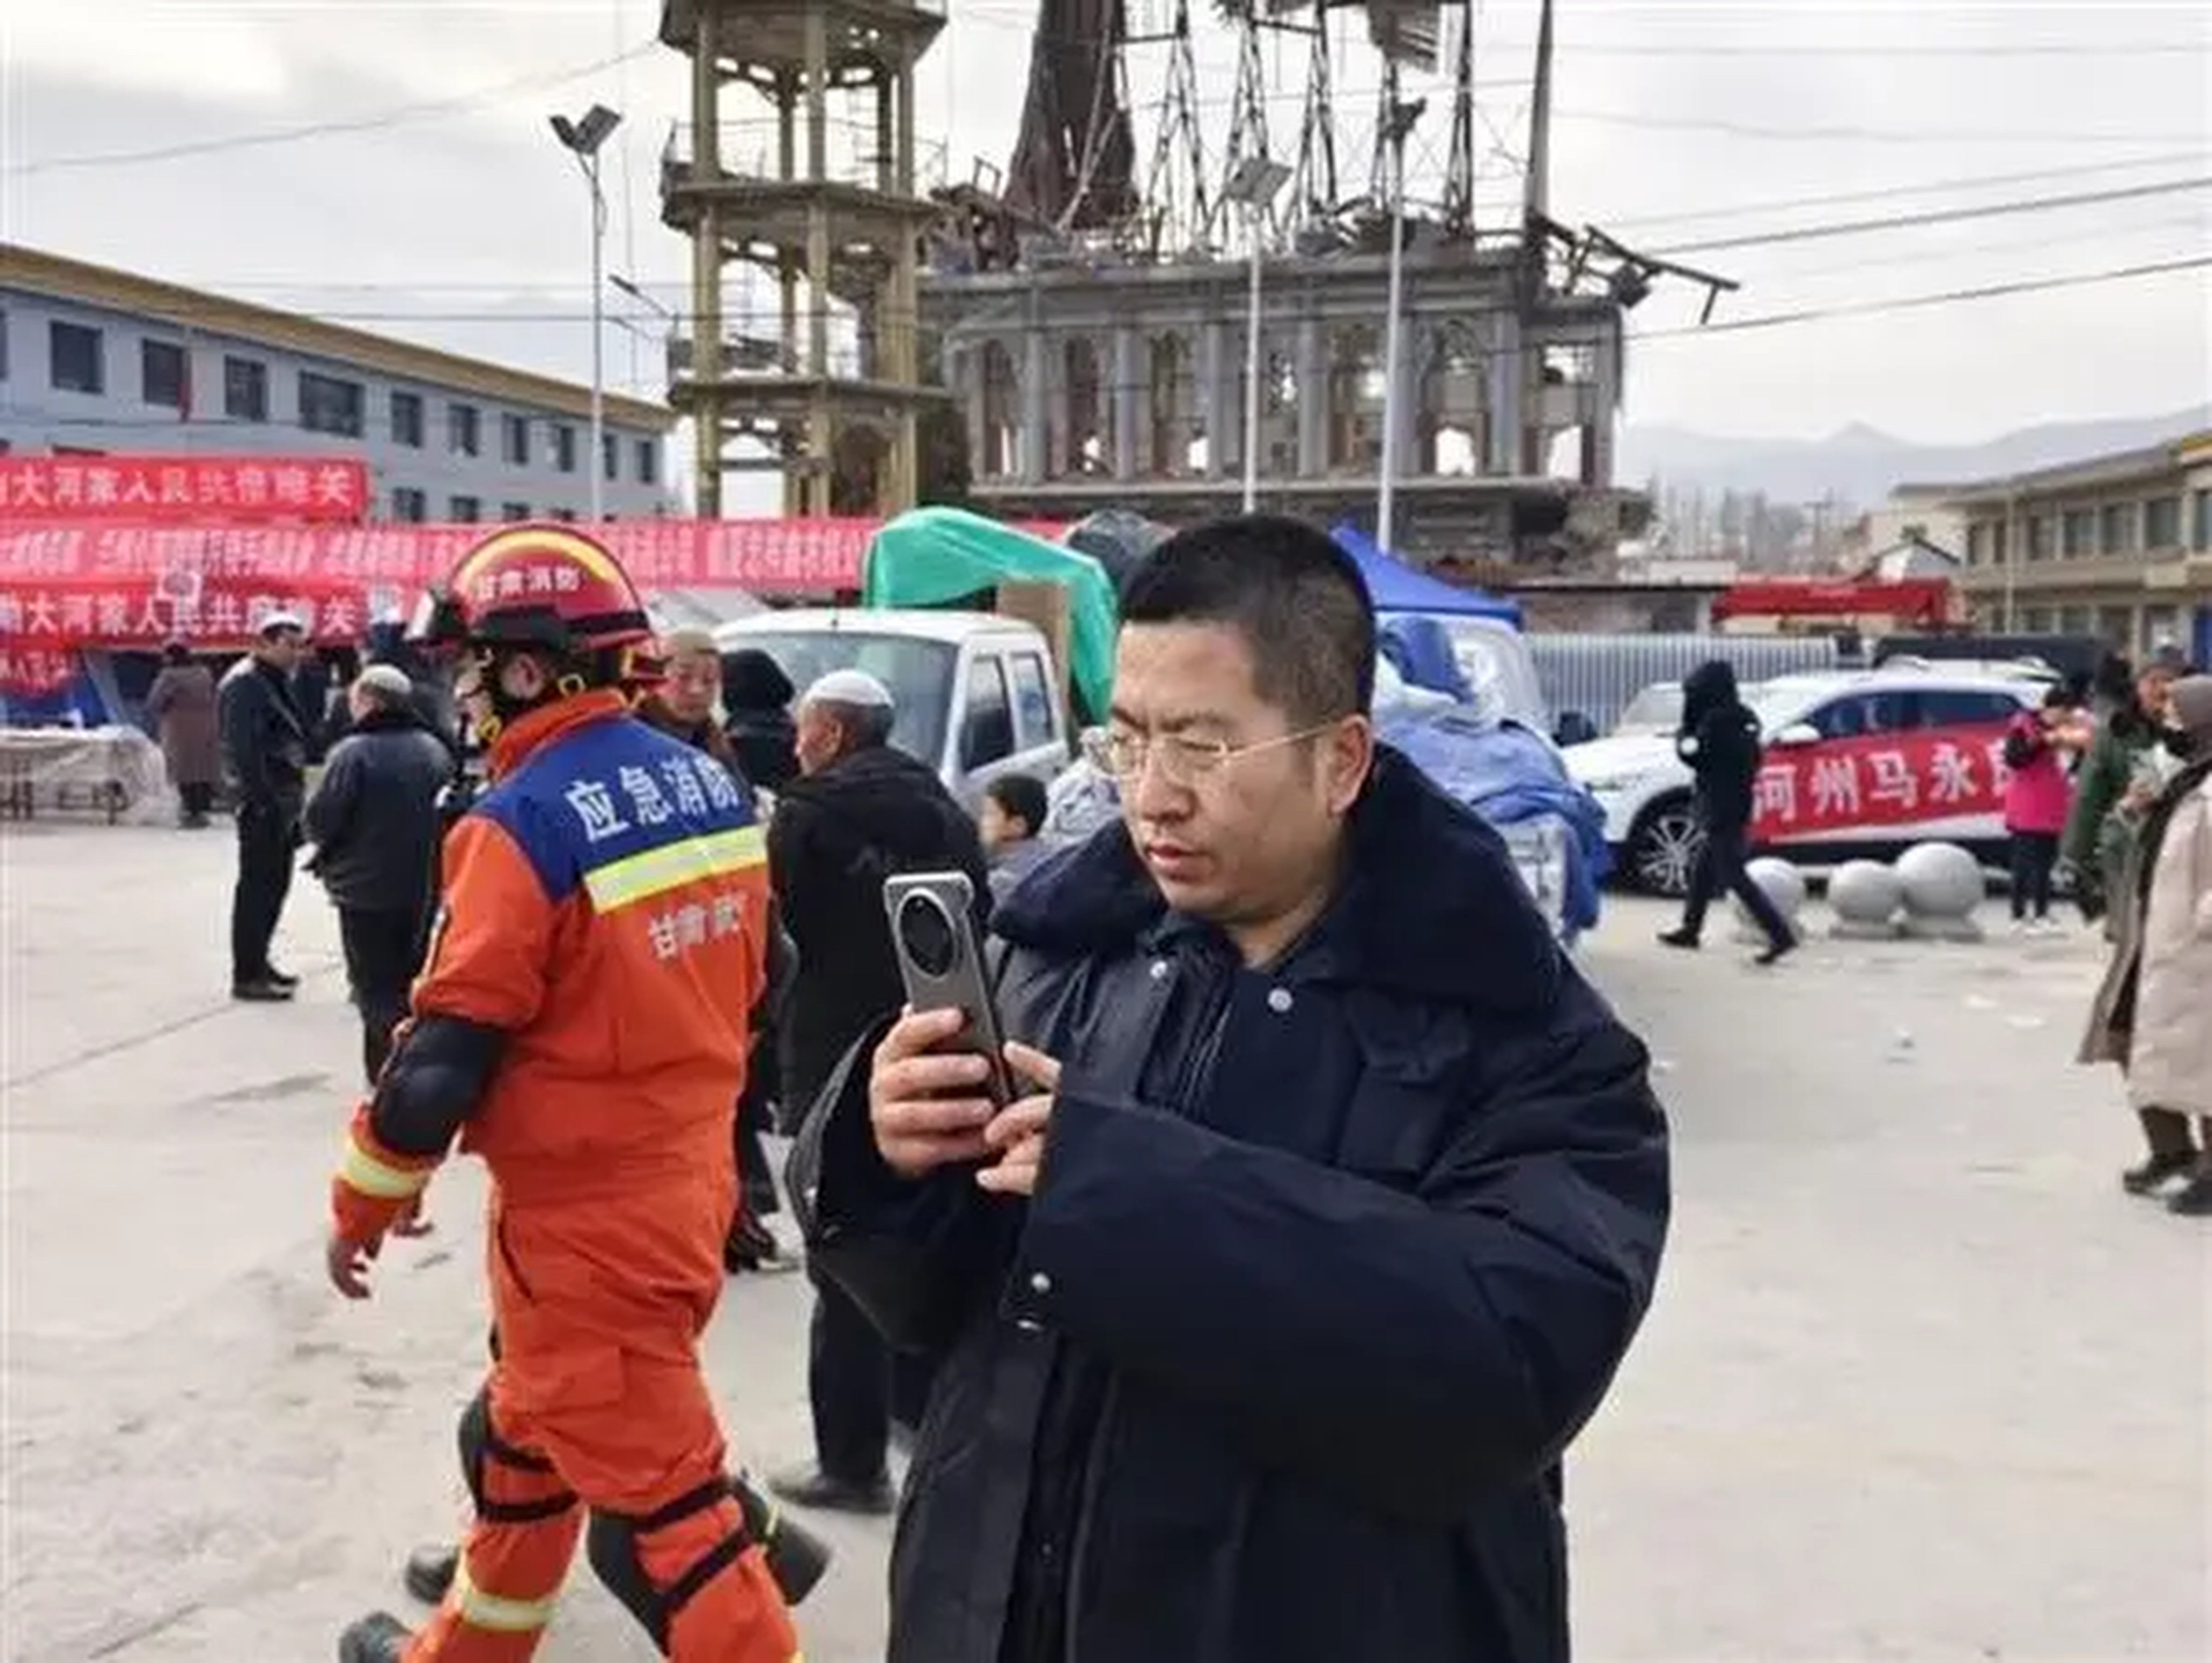 Satellite communication technology has come in leaps and bounds after a devastating 2008 earthquake. Here, a man caught up in another earthquake in Gansu last year uses Huawei’s Mate 60 Pro smartphone to make a satellite call. Photo: Handout